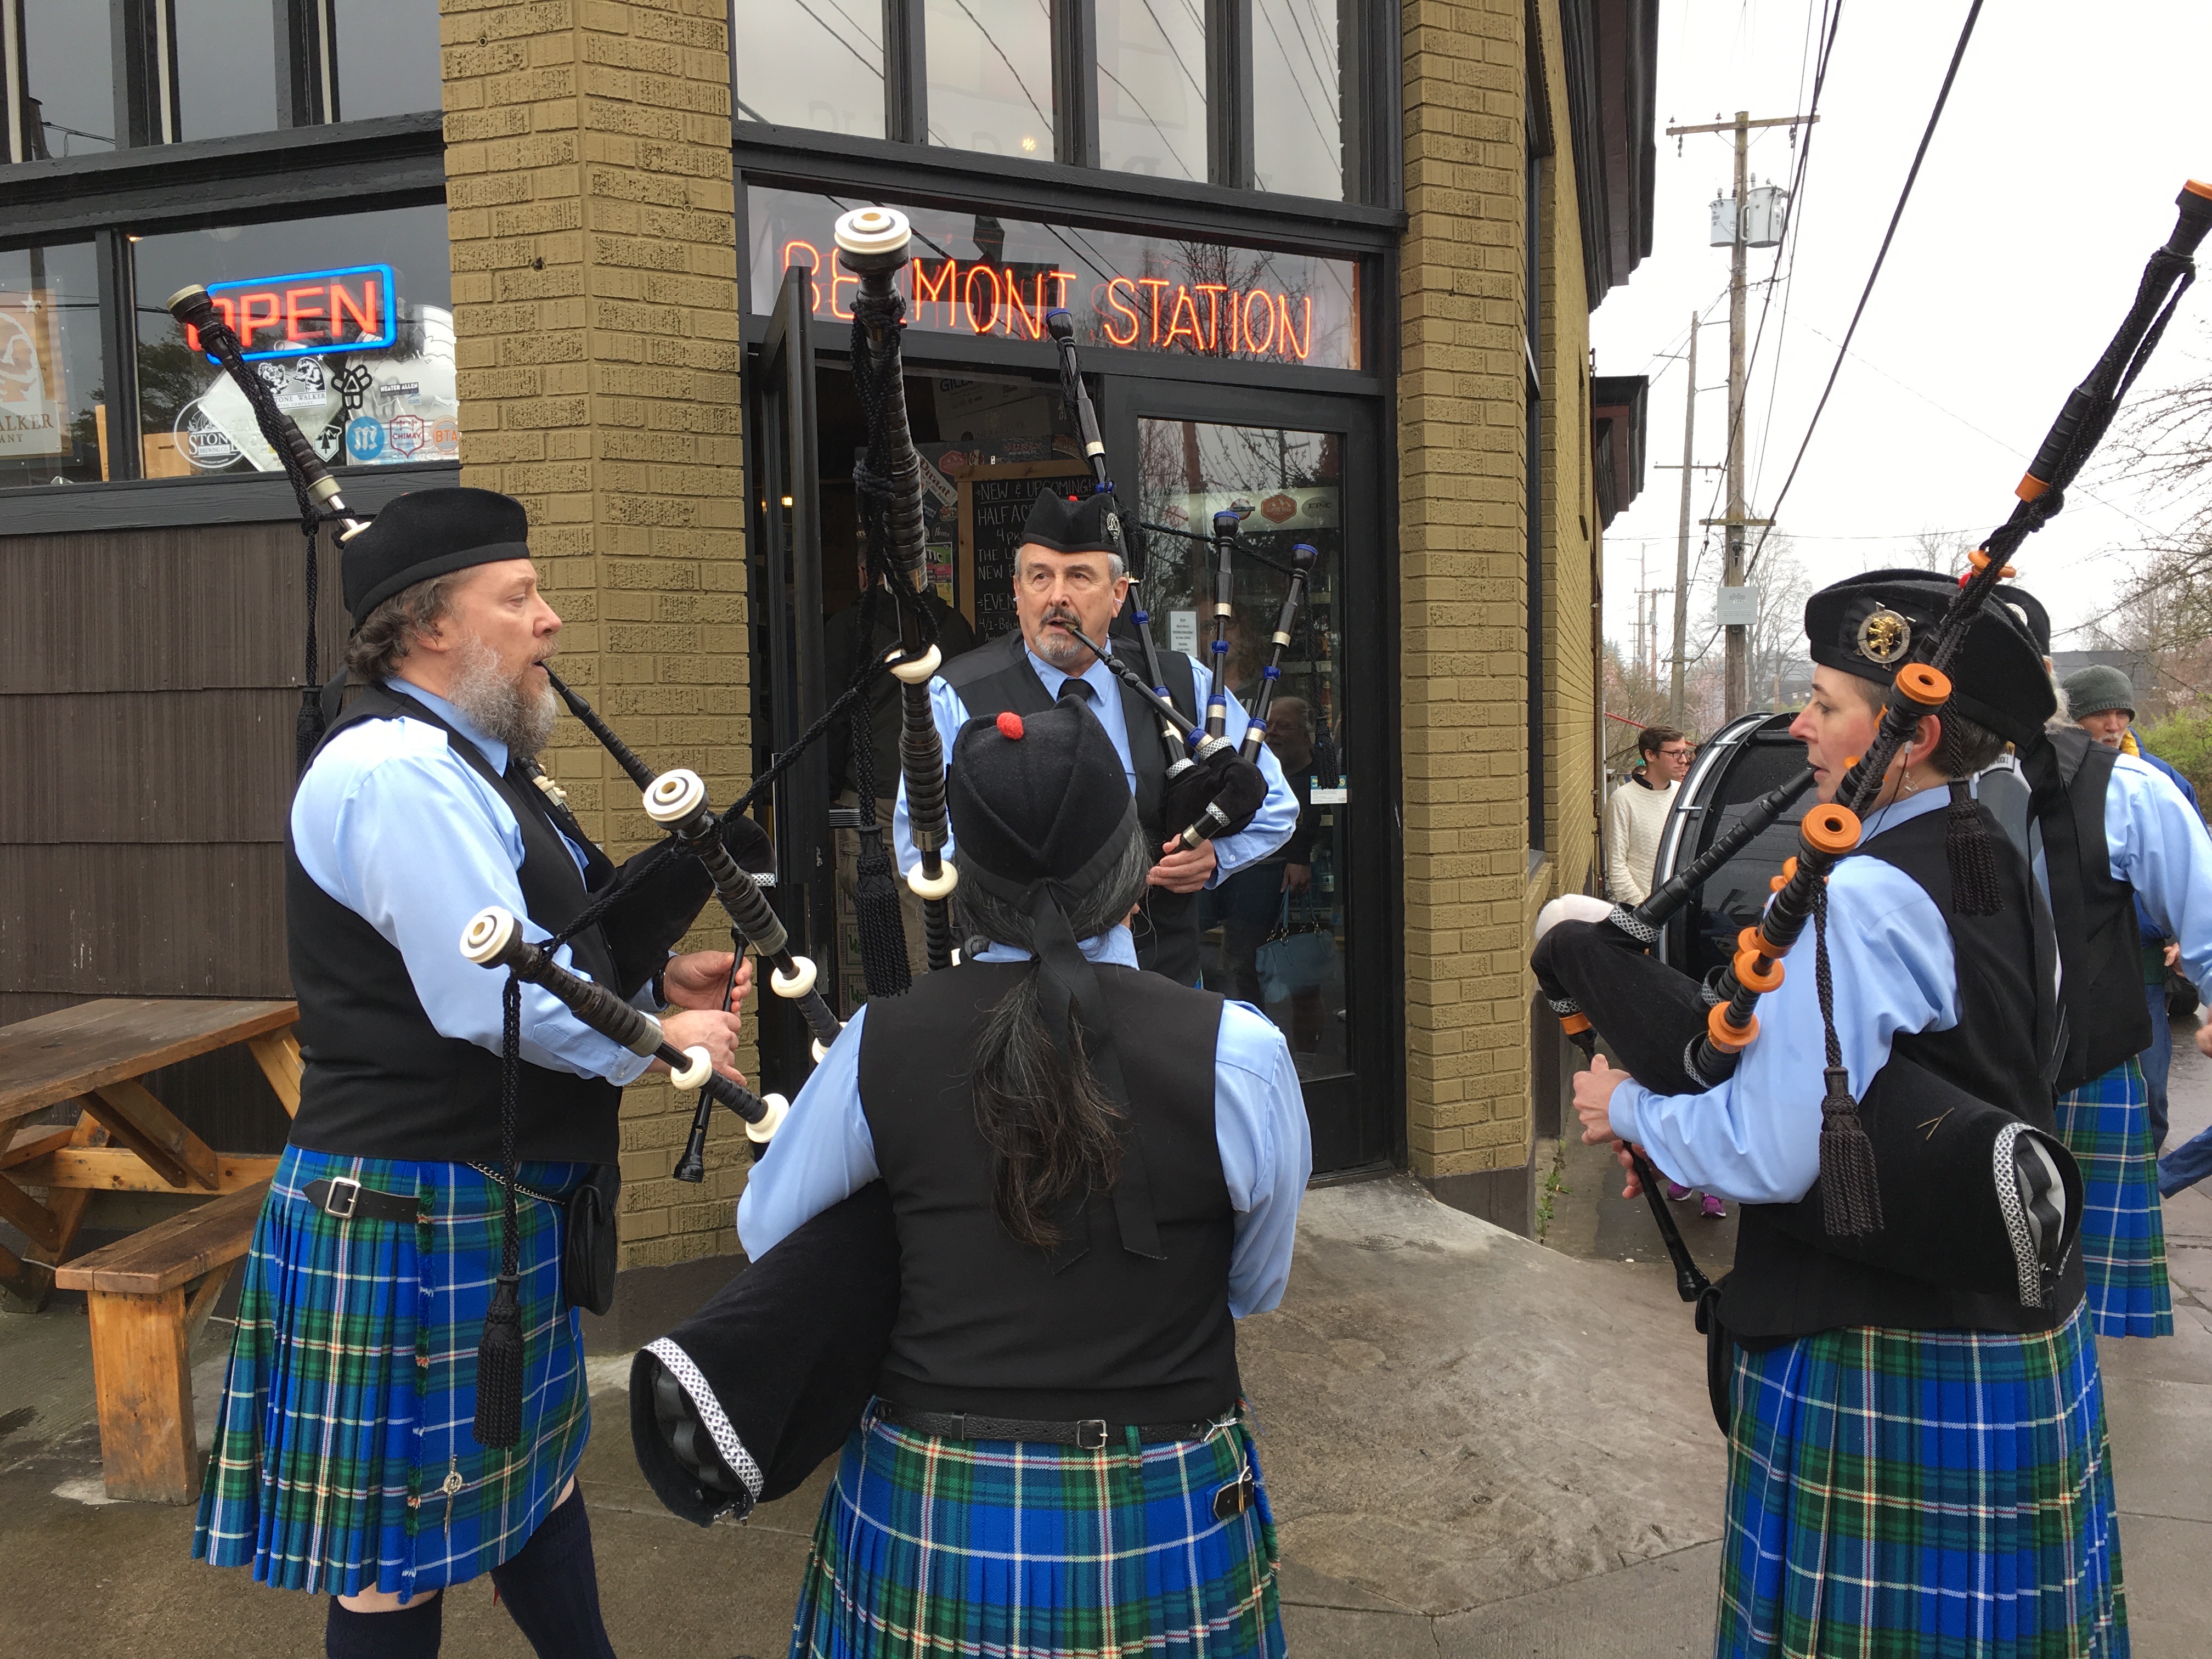 Bagpipes at the Belmont Station 20th Anniversary.